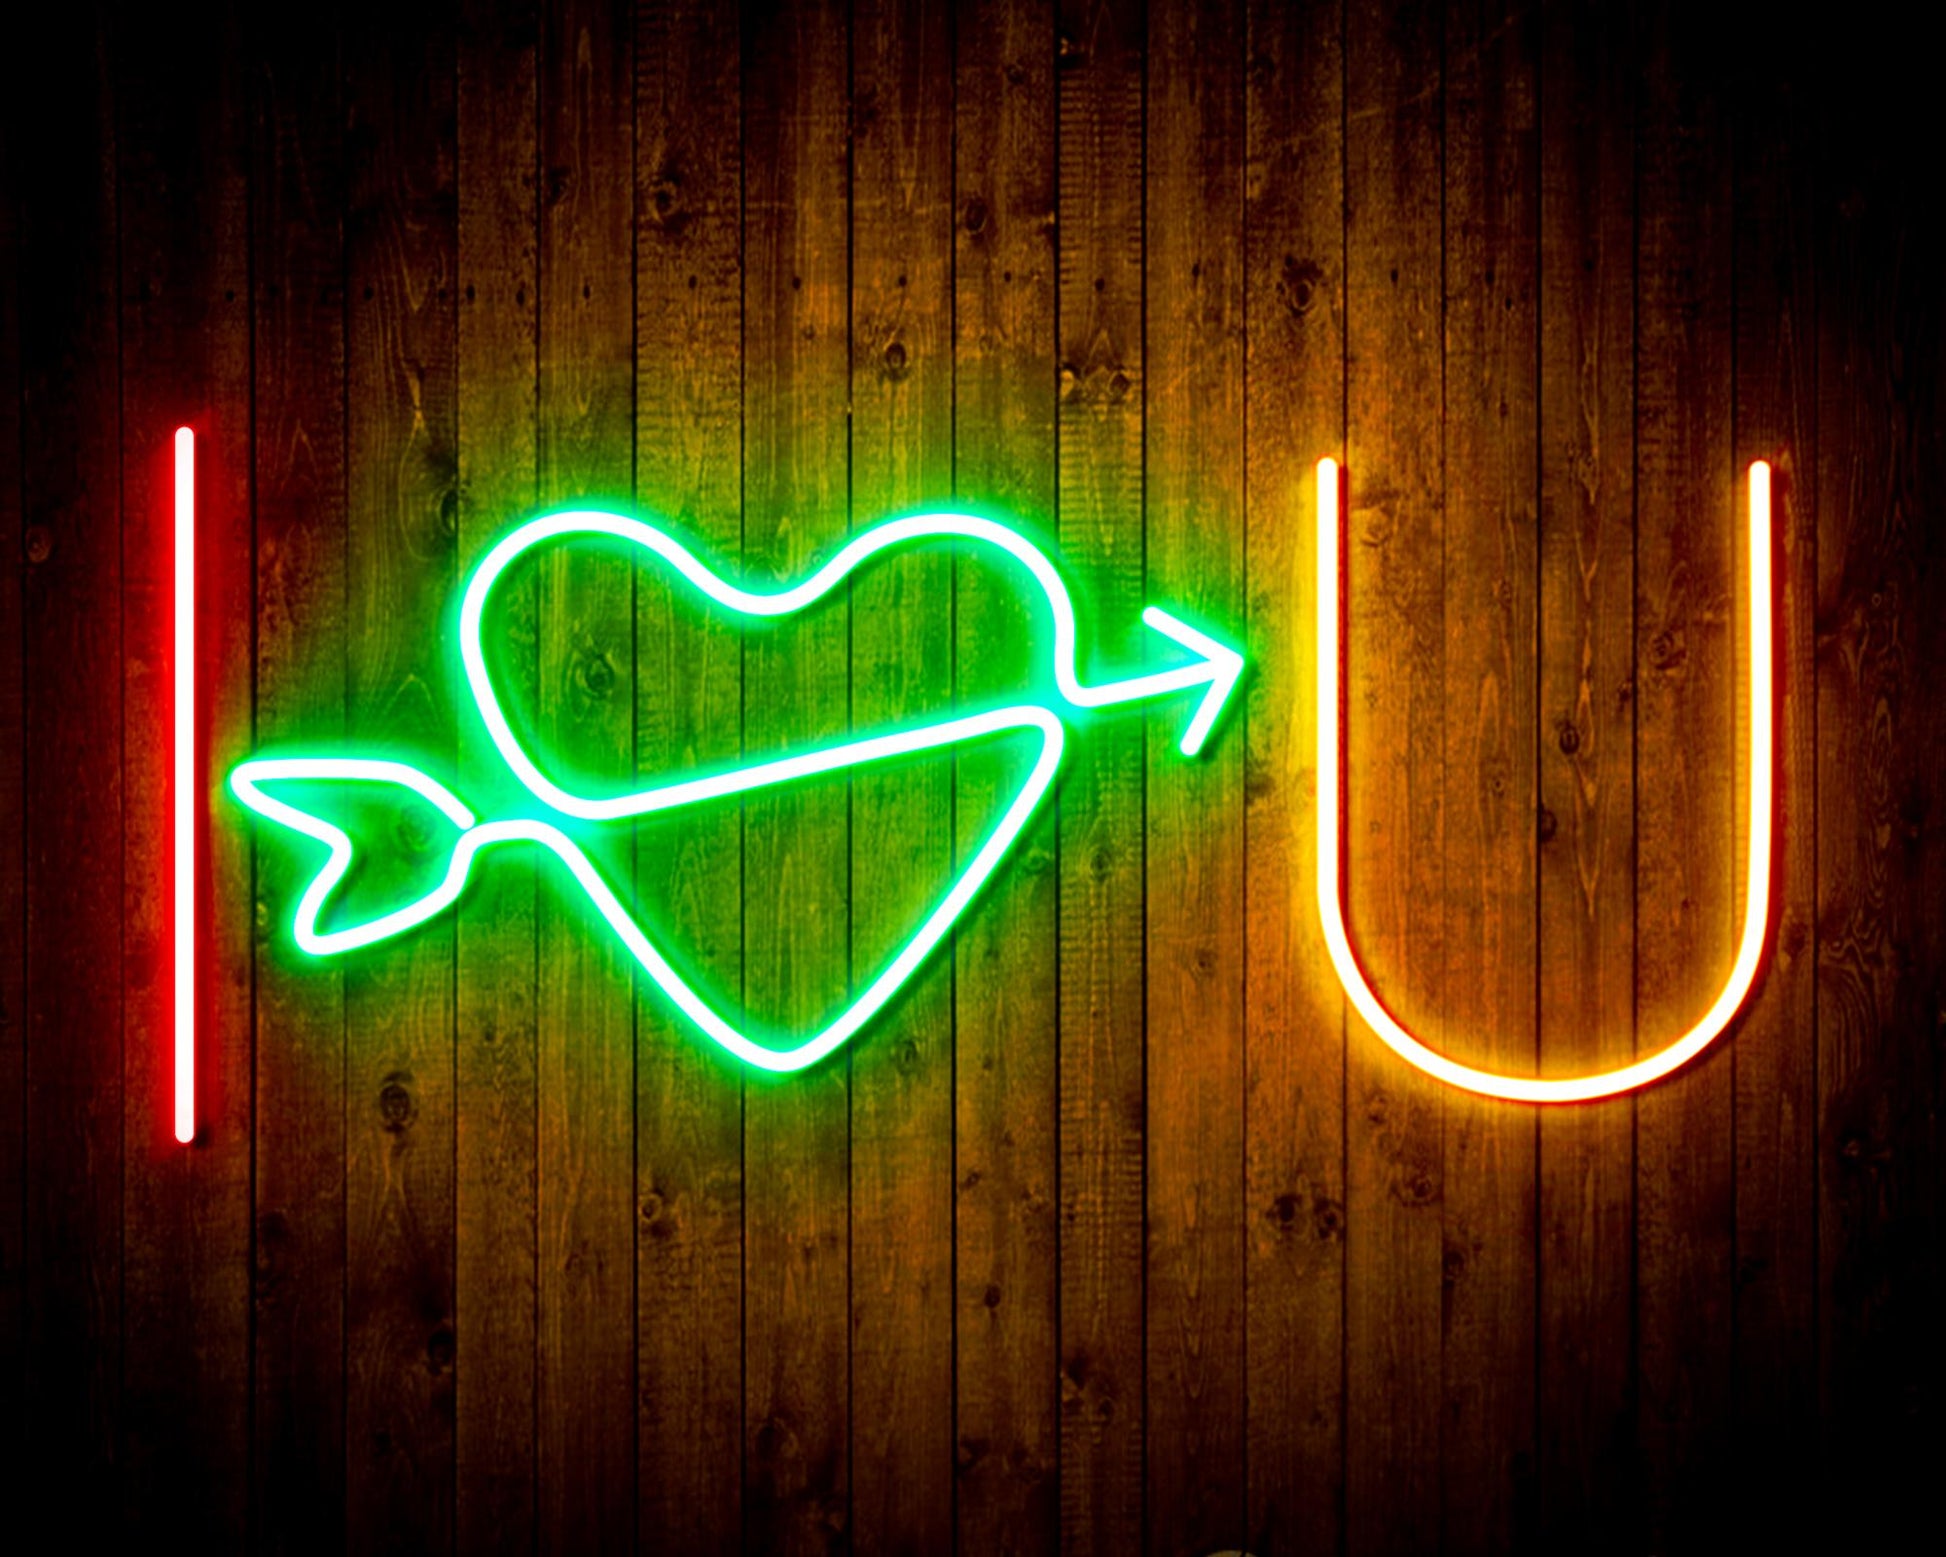 I Love You Flex Silicone LED Neon Sign - Way Up Gifts